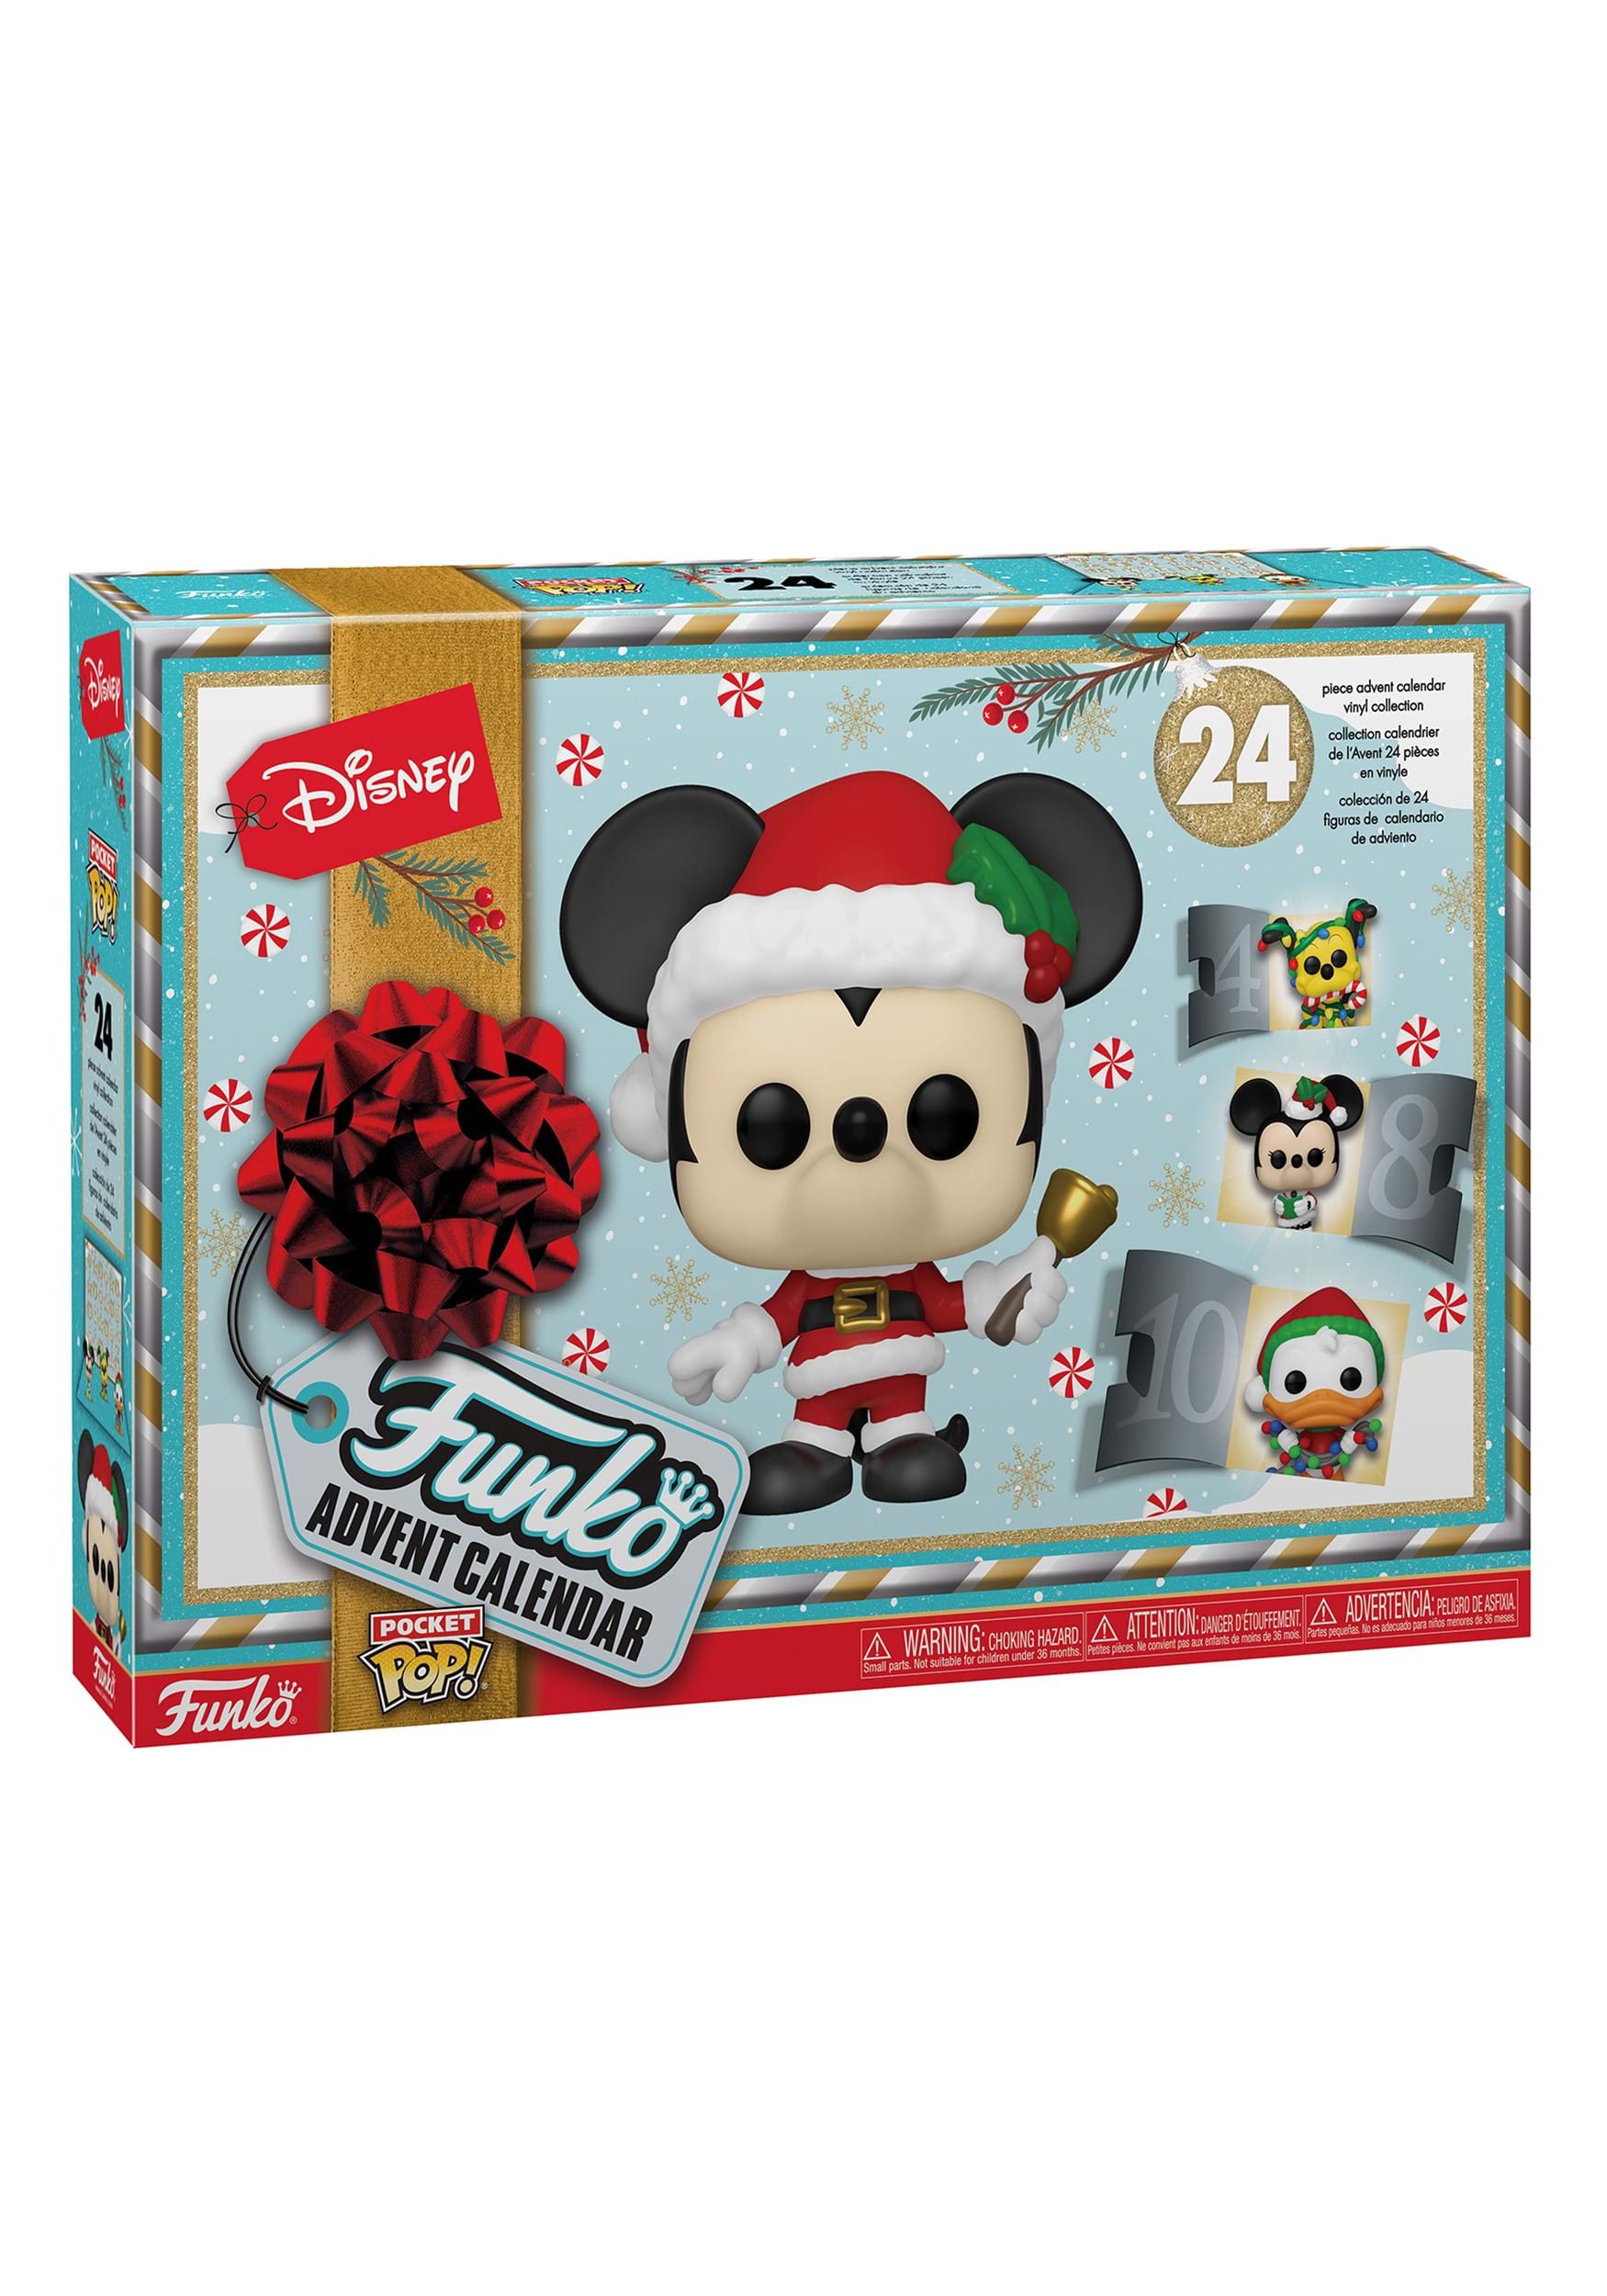 Calendrier Classic Mickey Mouse 2024